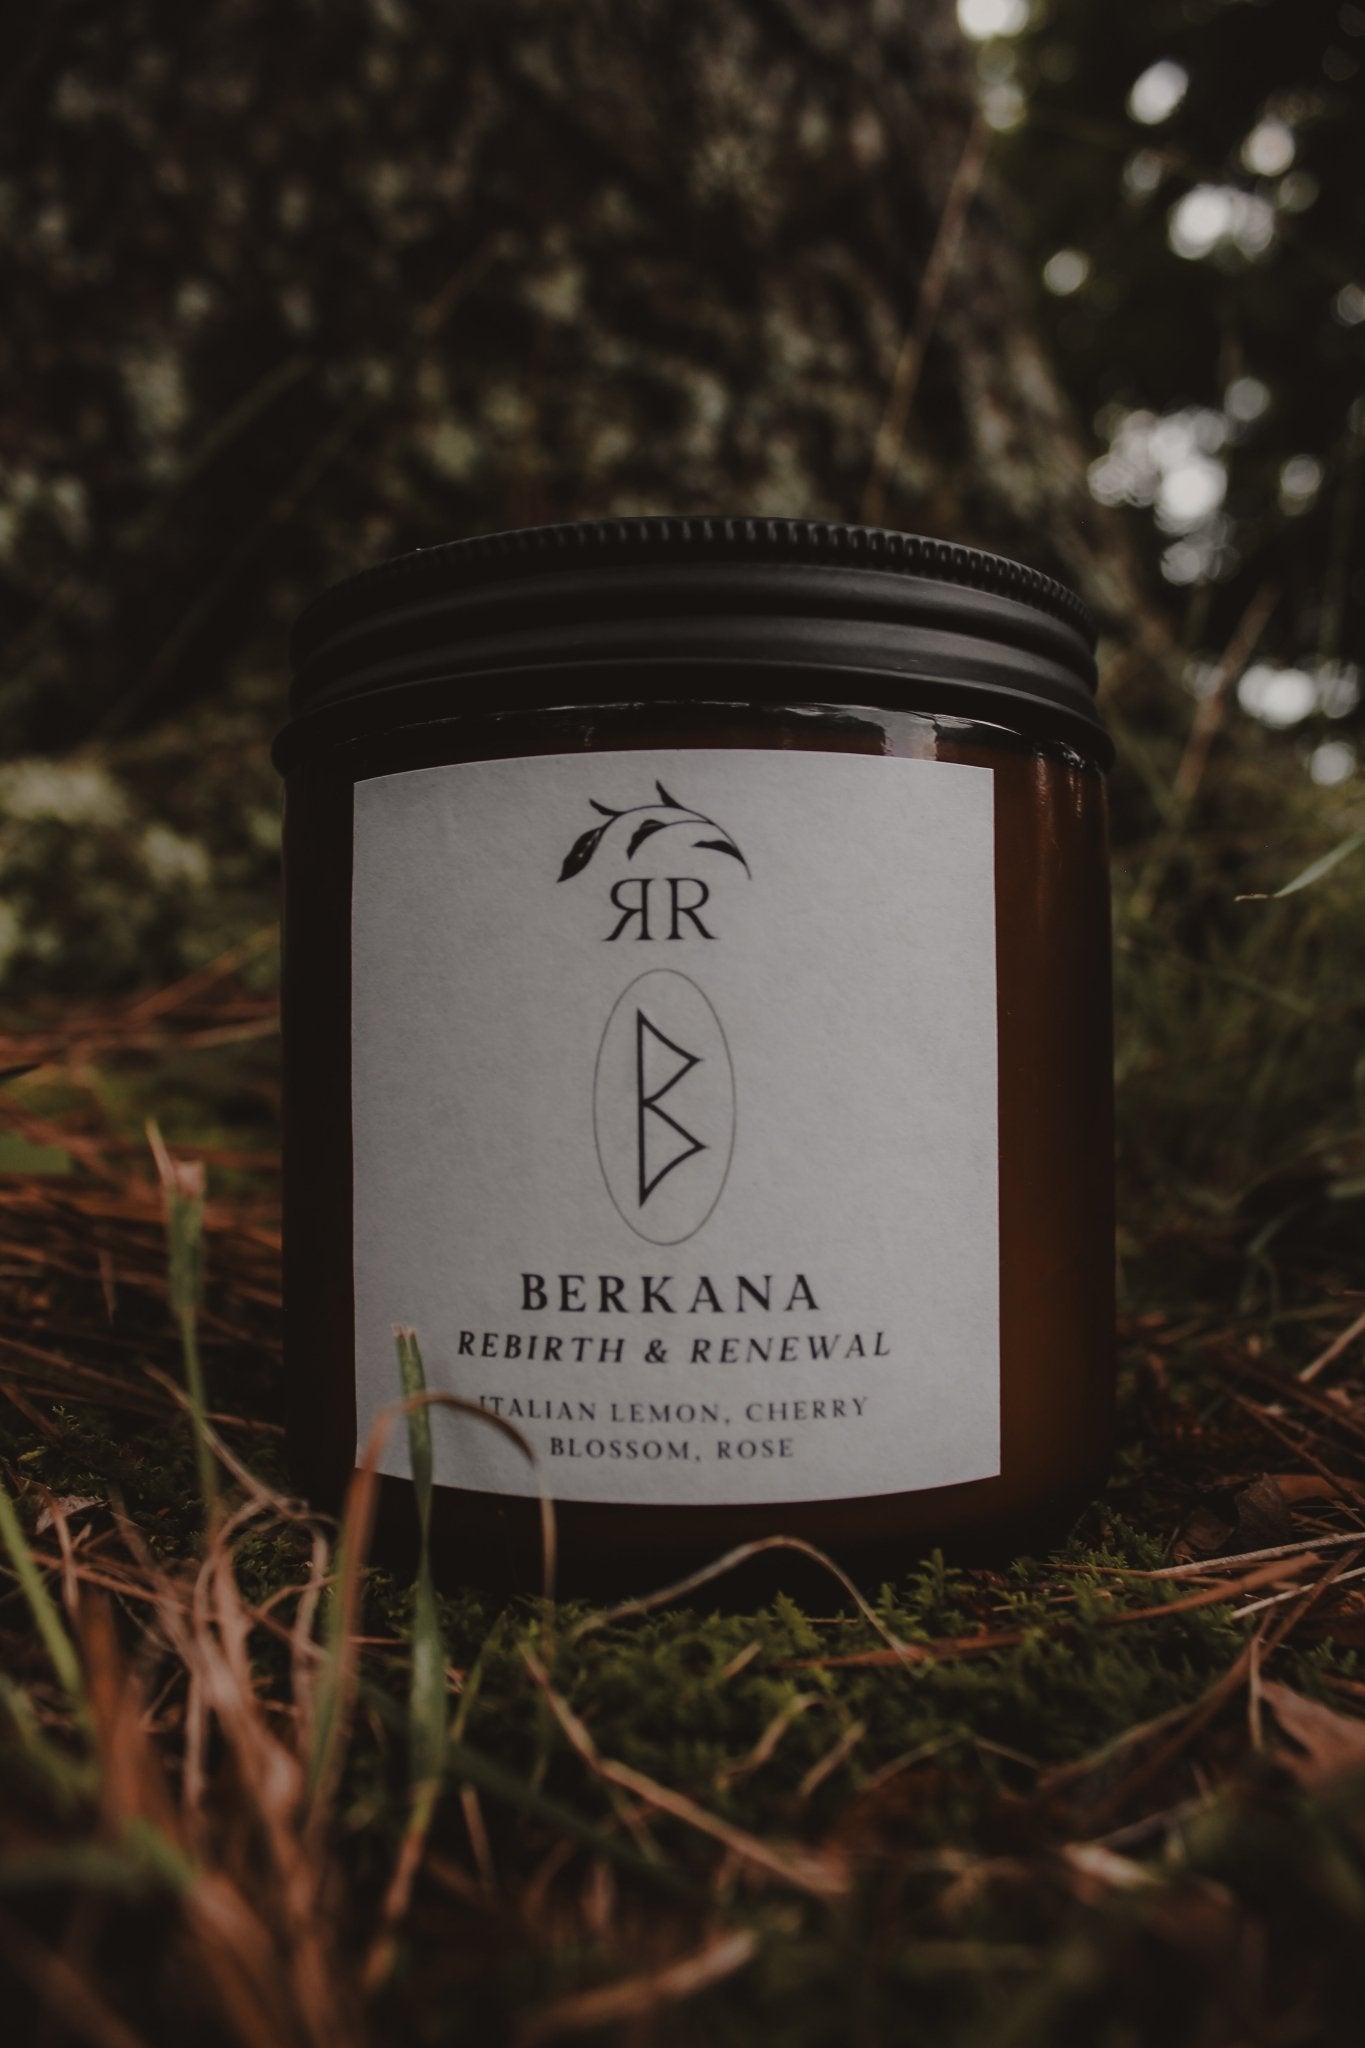 Berkana Rune Candle with lemon, cherry blossom, and rose scents. Glass jar with crackling wooden wick.